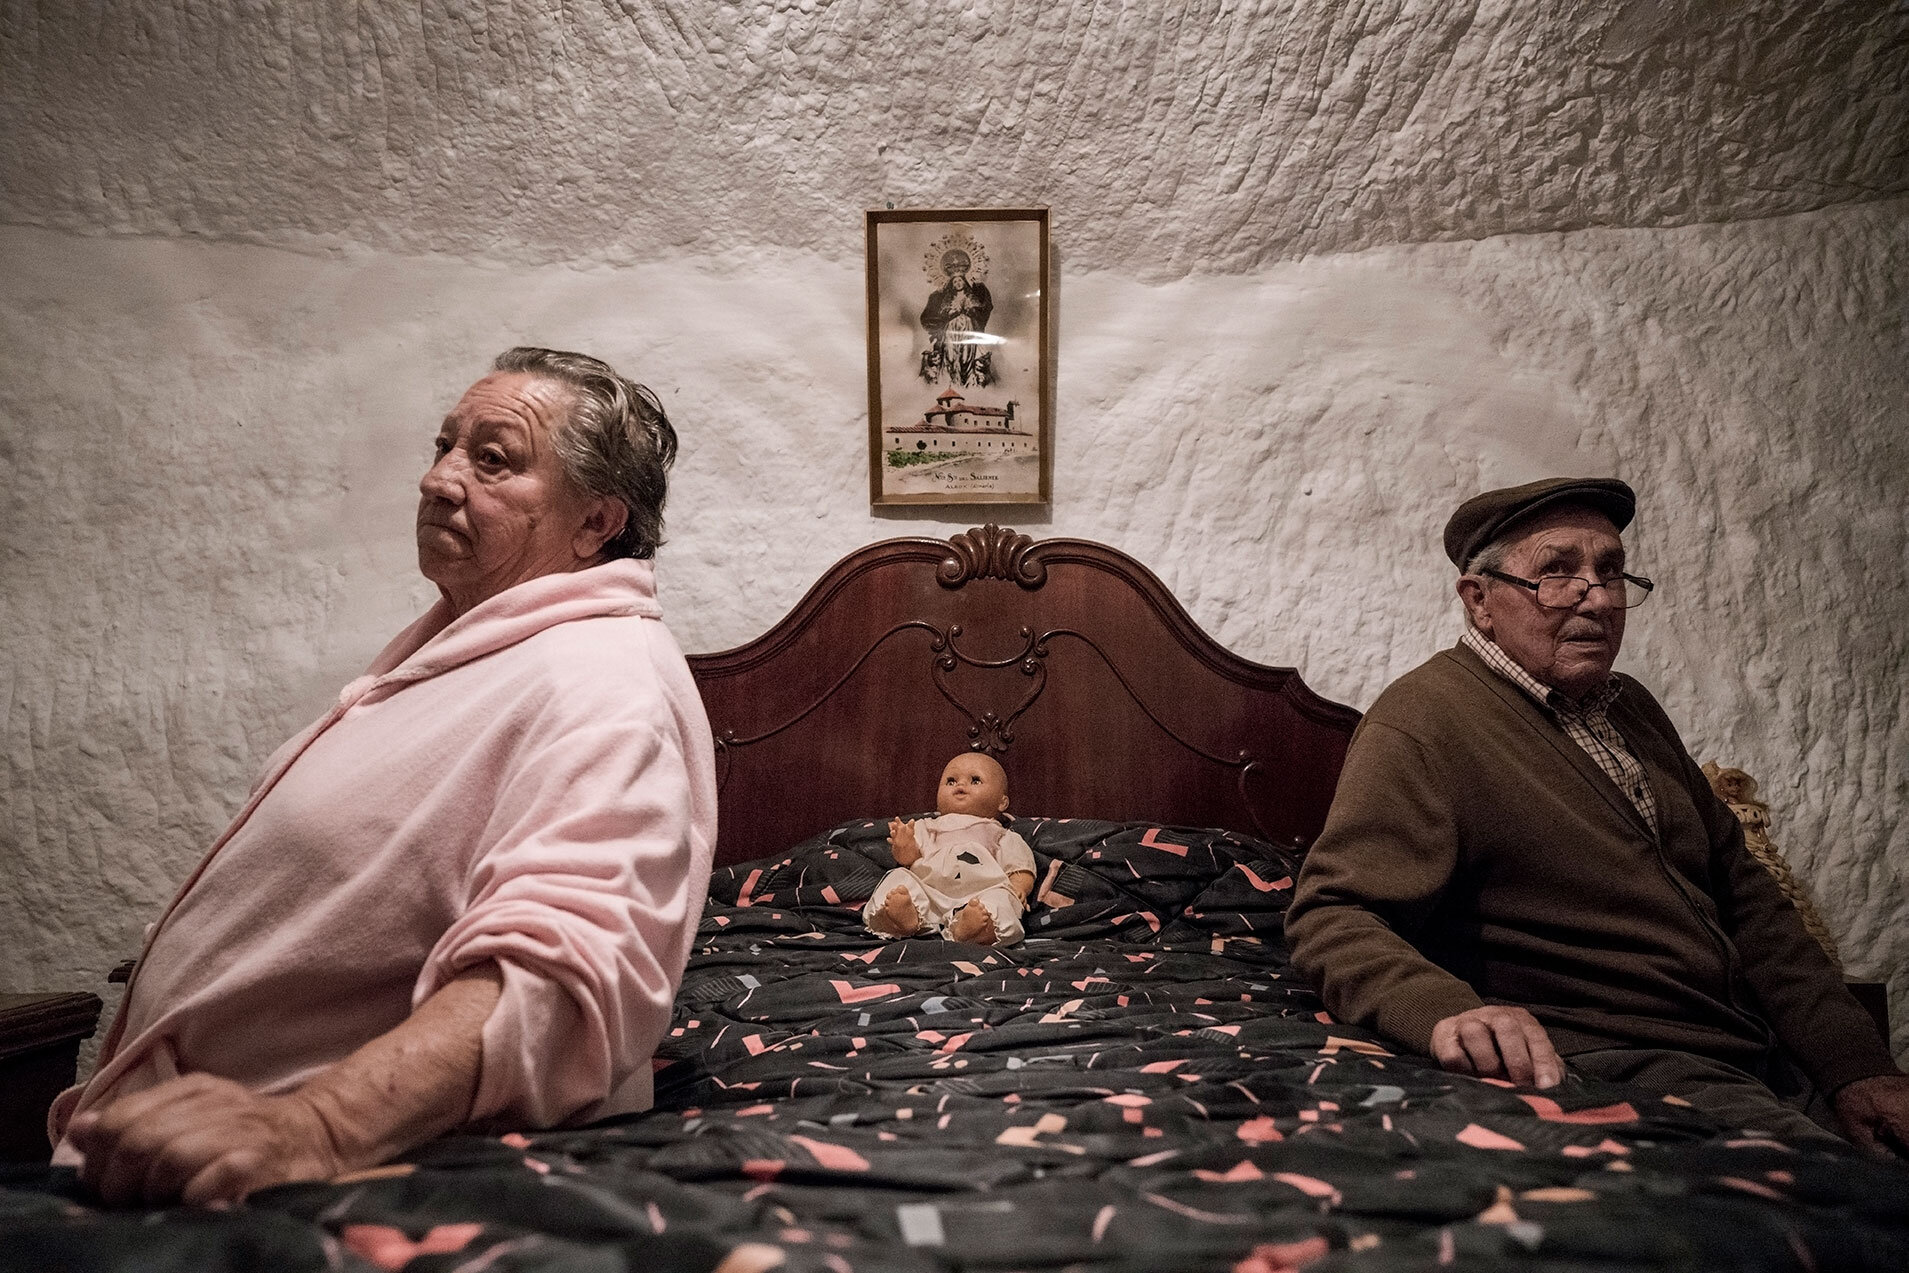  Piedad Mezco and Antonio Ortiz have lived all their lives in the caves of Guadix in Granada, Spain. They were both born inside a cave and raised in the hills. In the past, Antonio worked on a farm and Piedad made wood chairs.  © Tamara Merino  